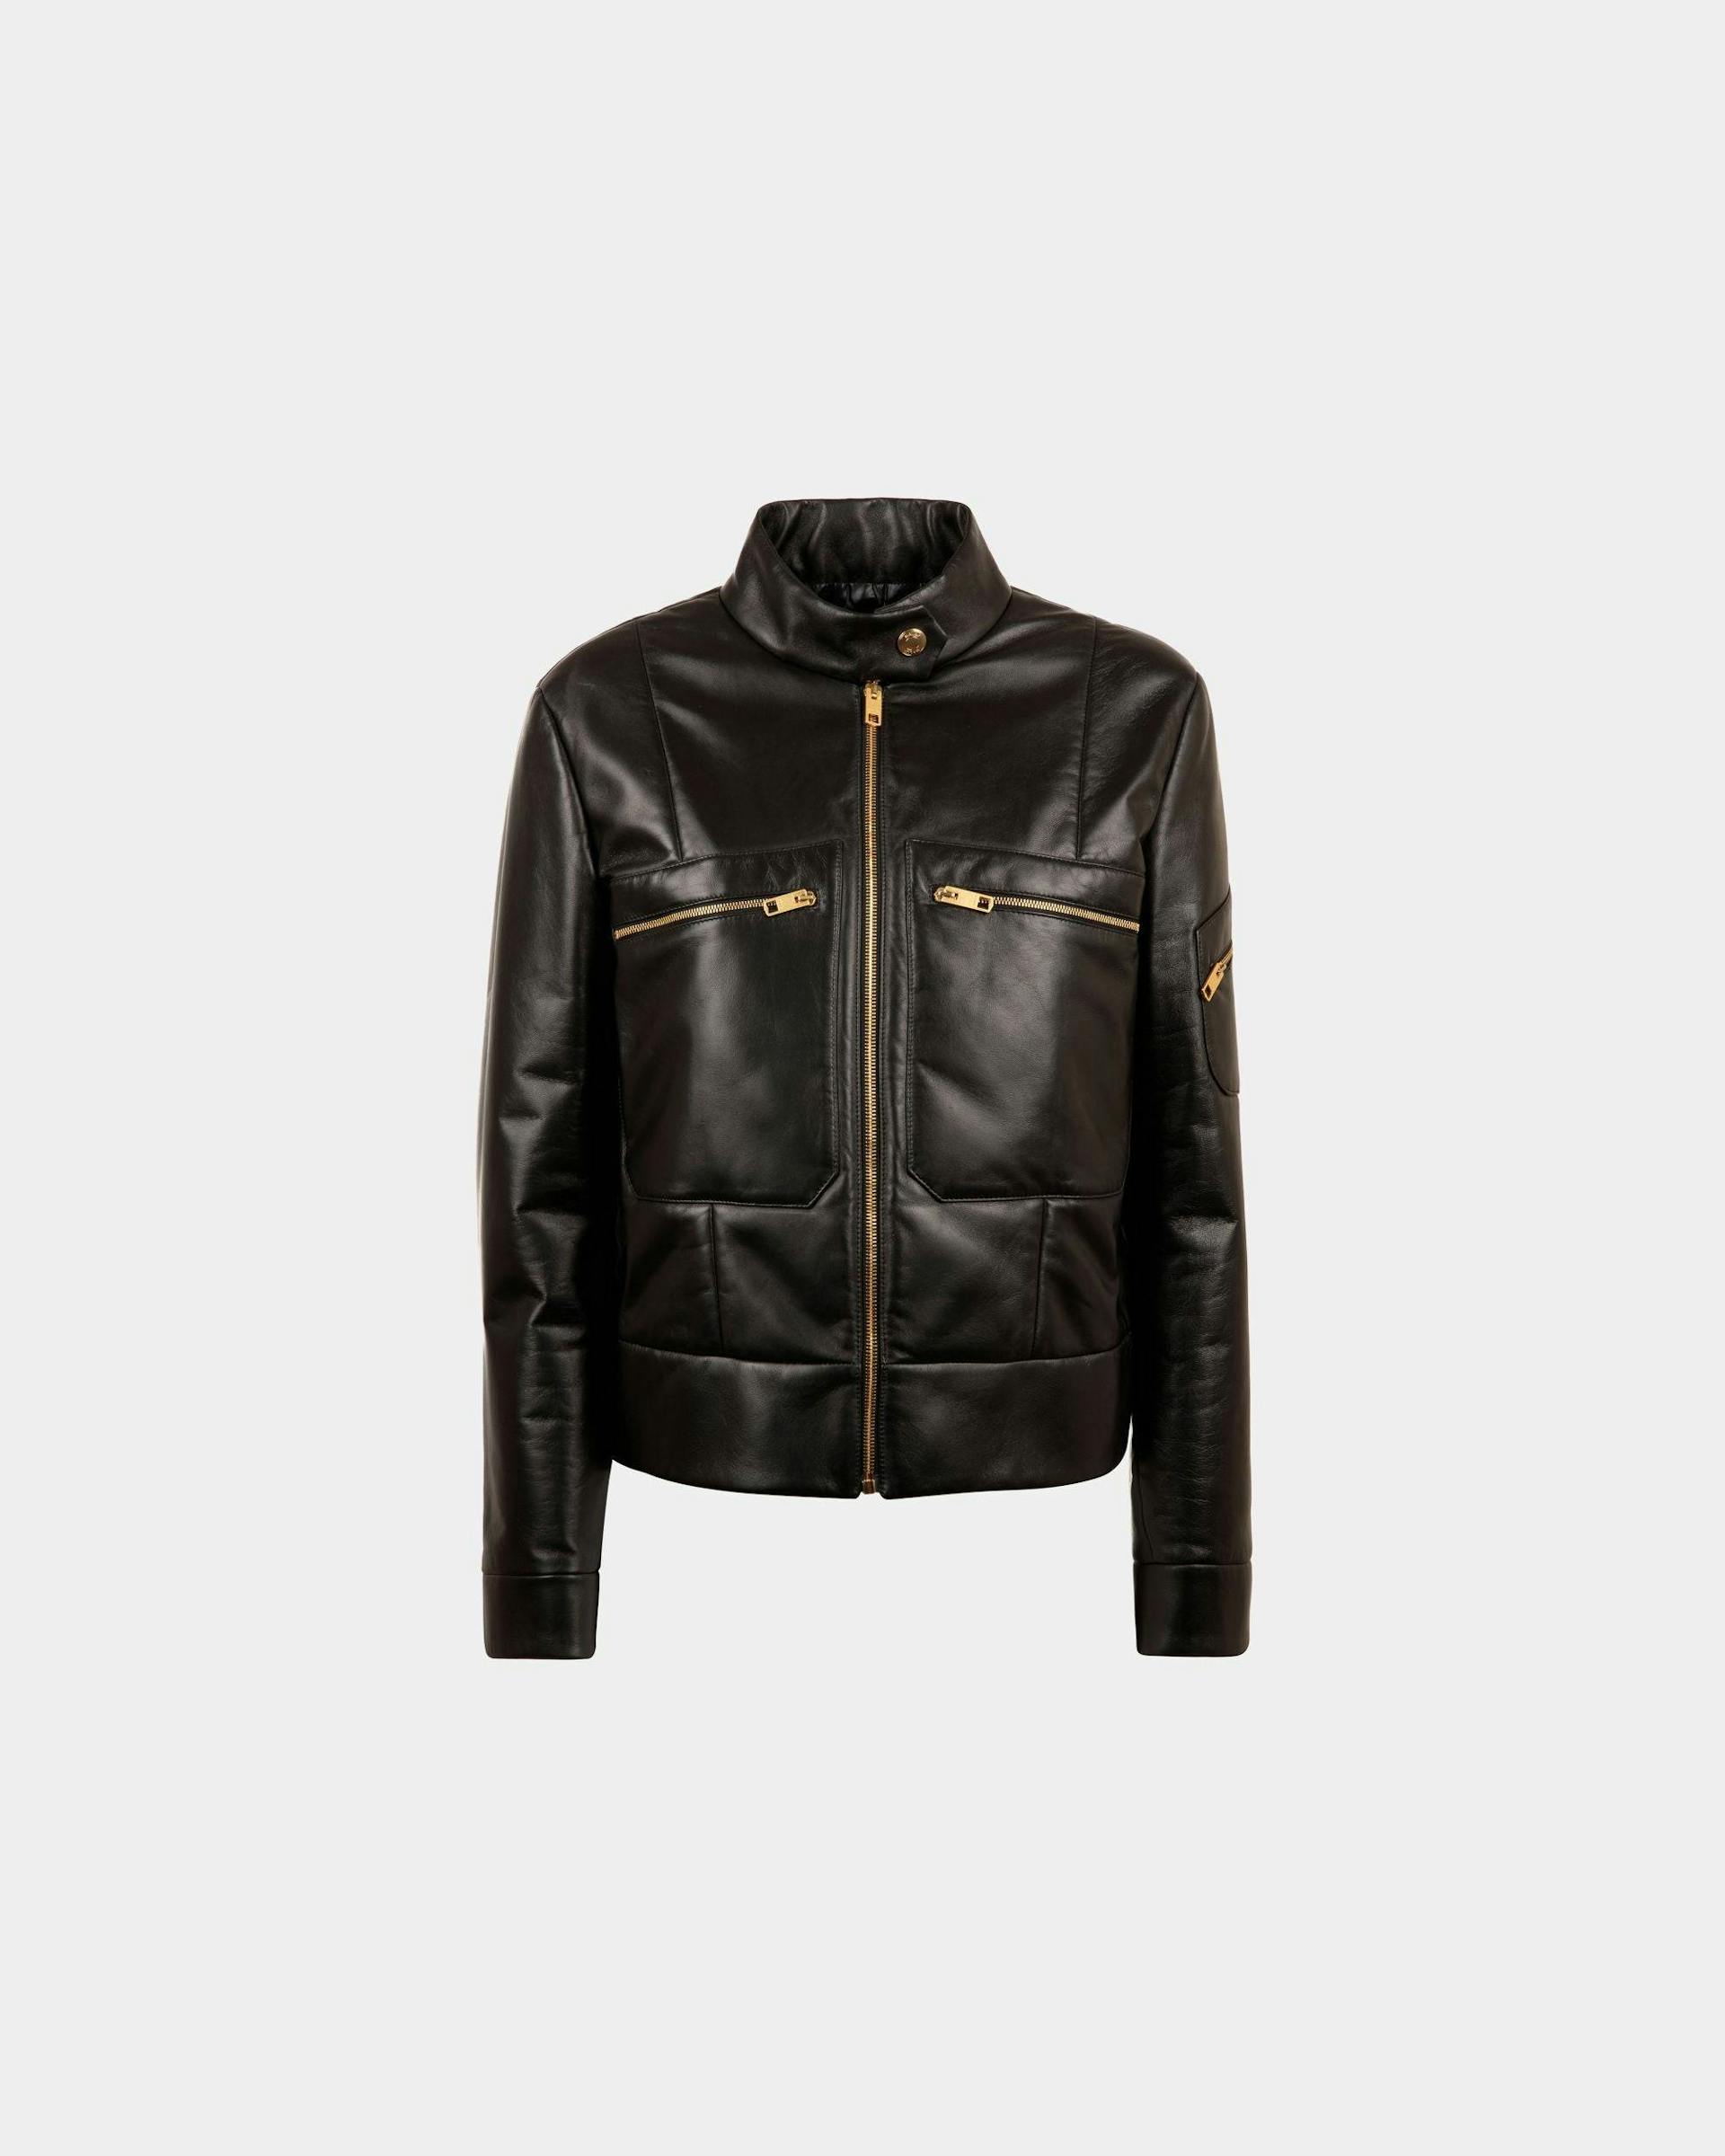 Women's Jacket In Black Leather | Bally | Still Life Front